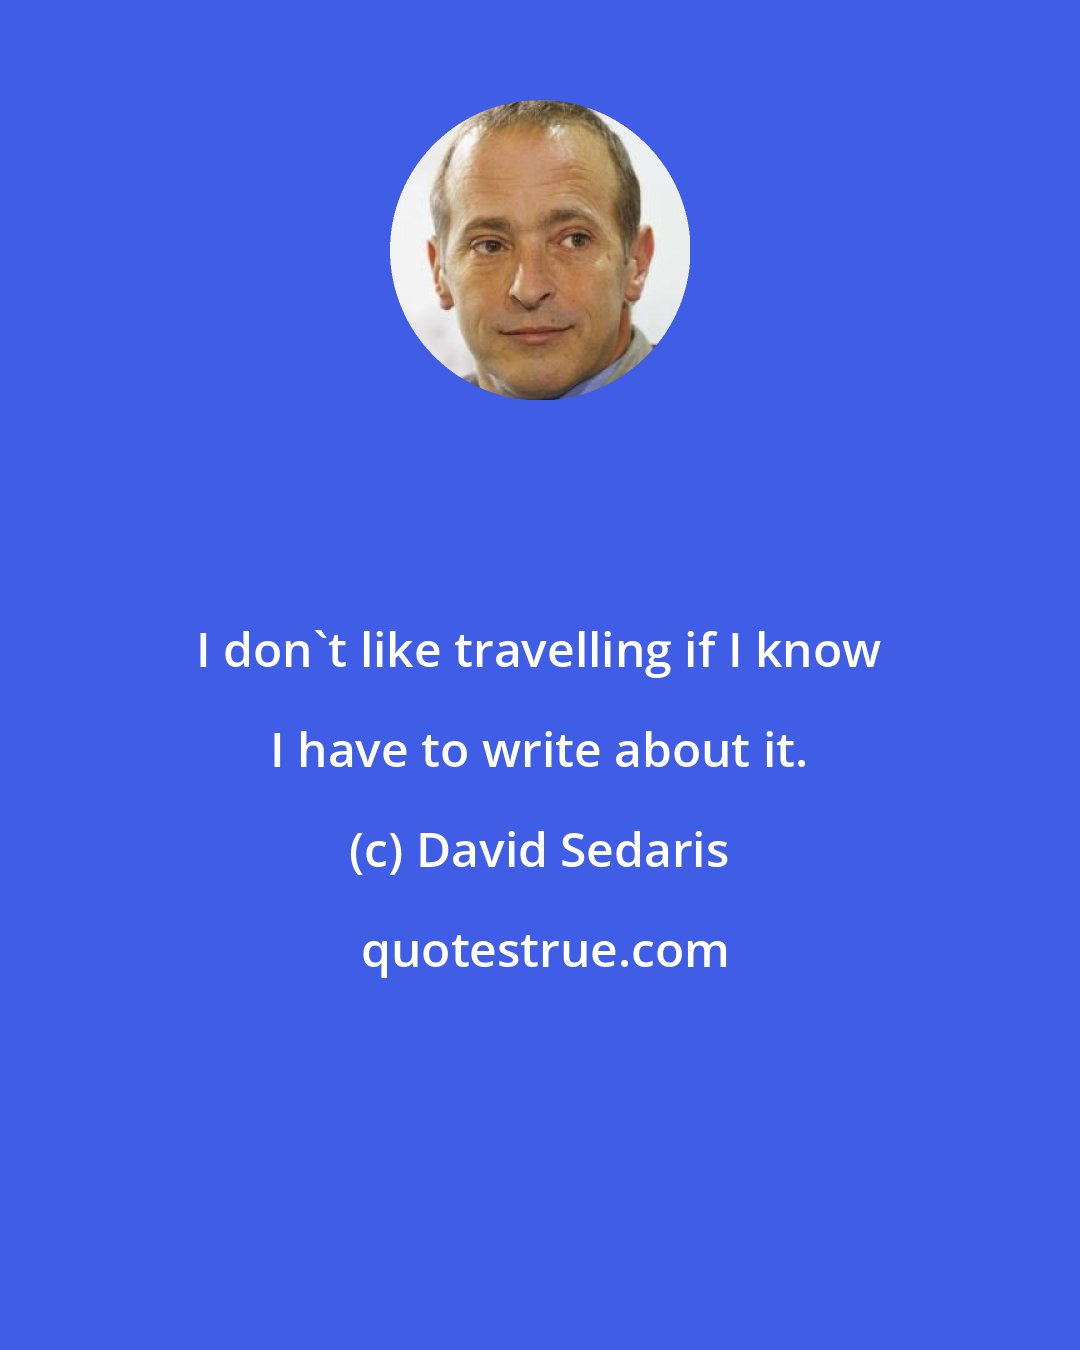 David Sedaris: I don't like travelling if I know I have to write about it.